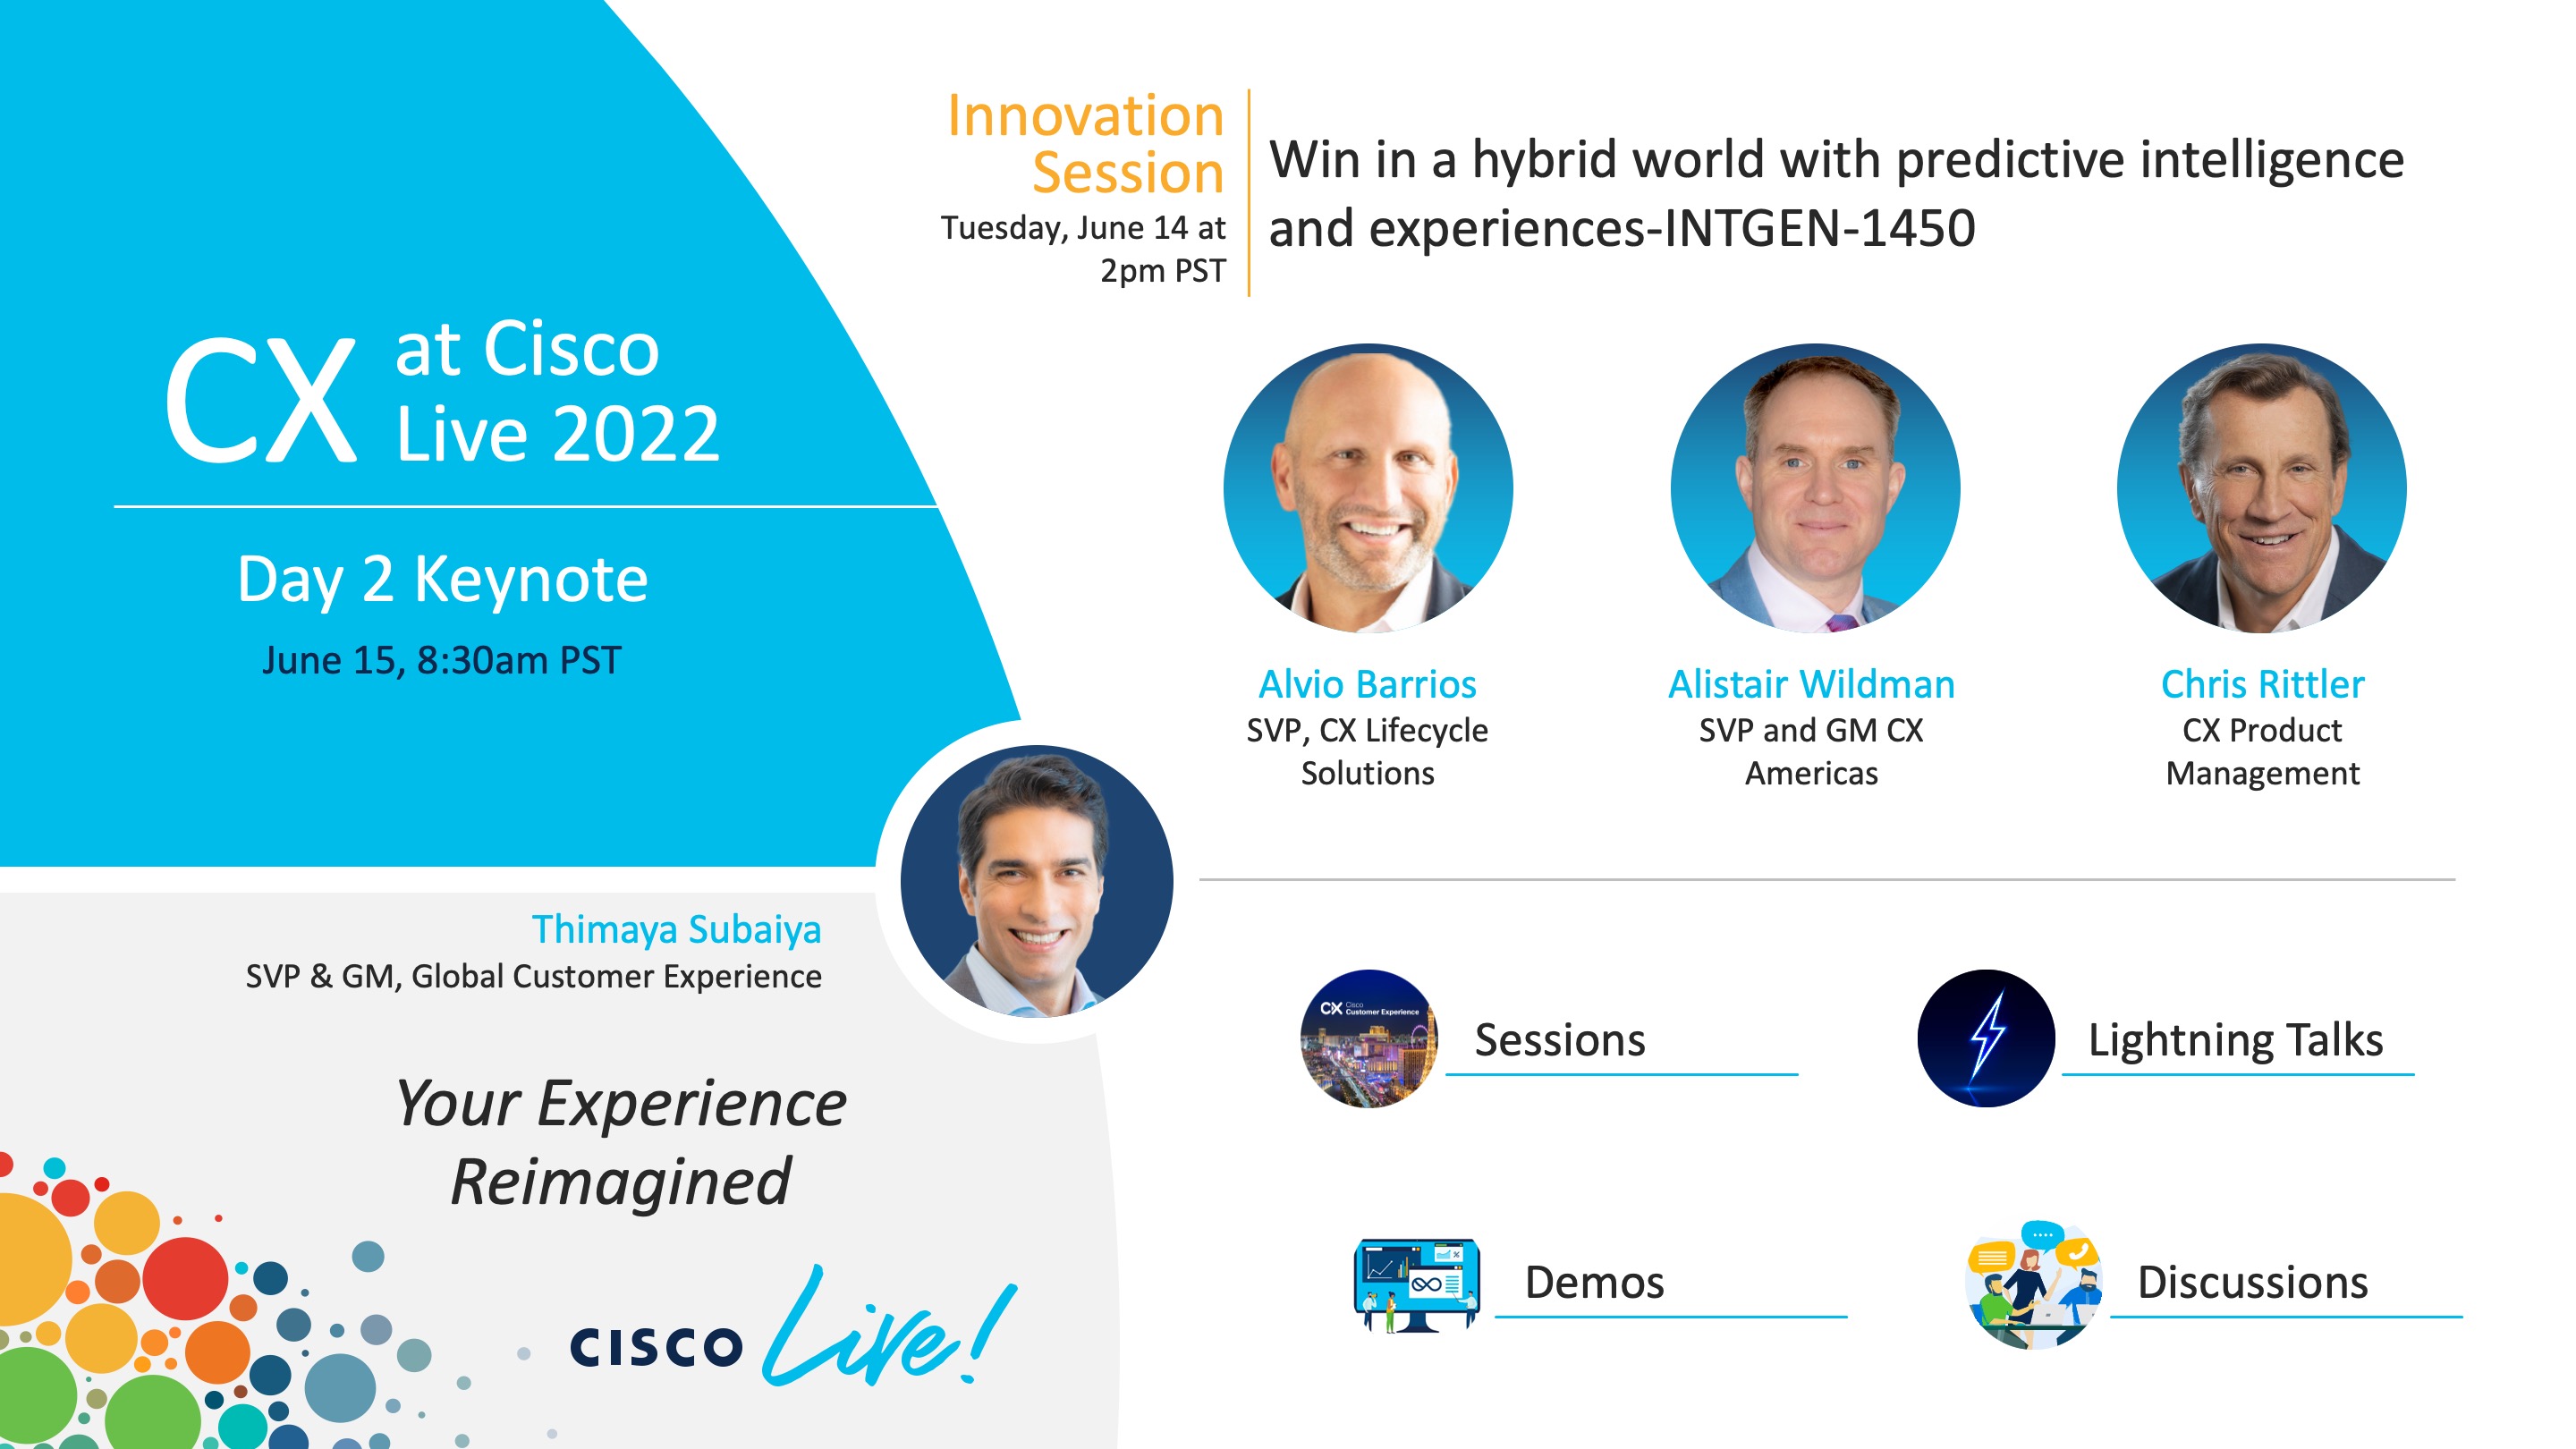 Cisco Live 2022 keynote "Your Experience ReImagined"